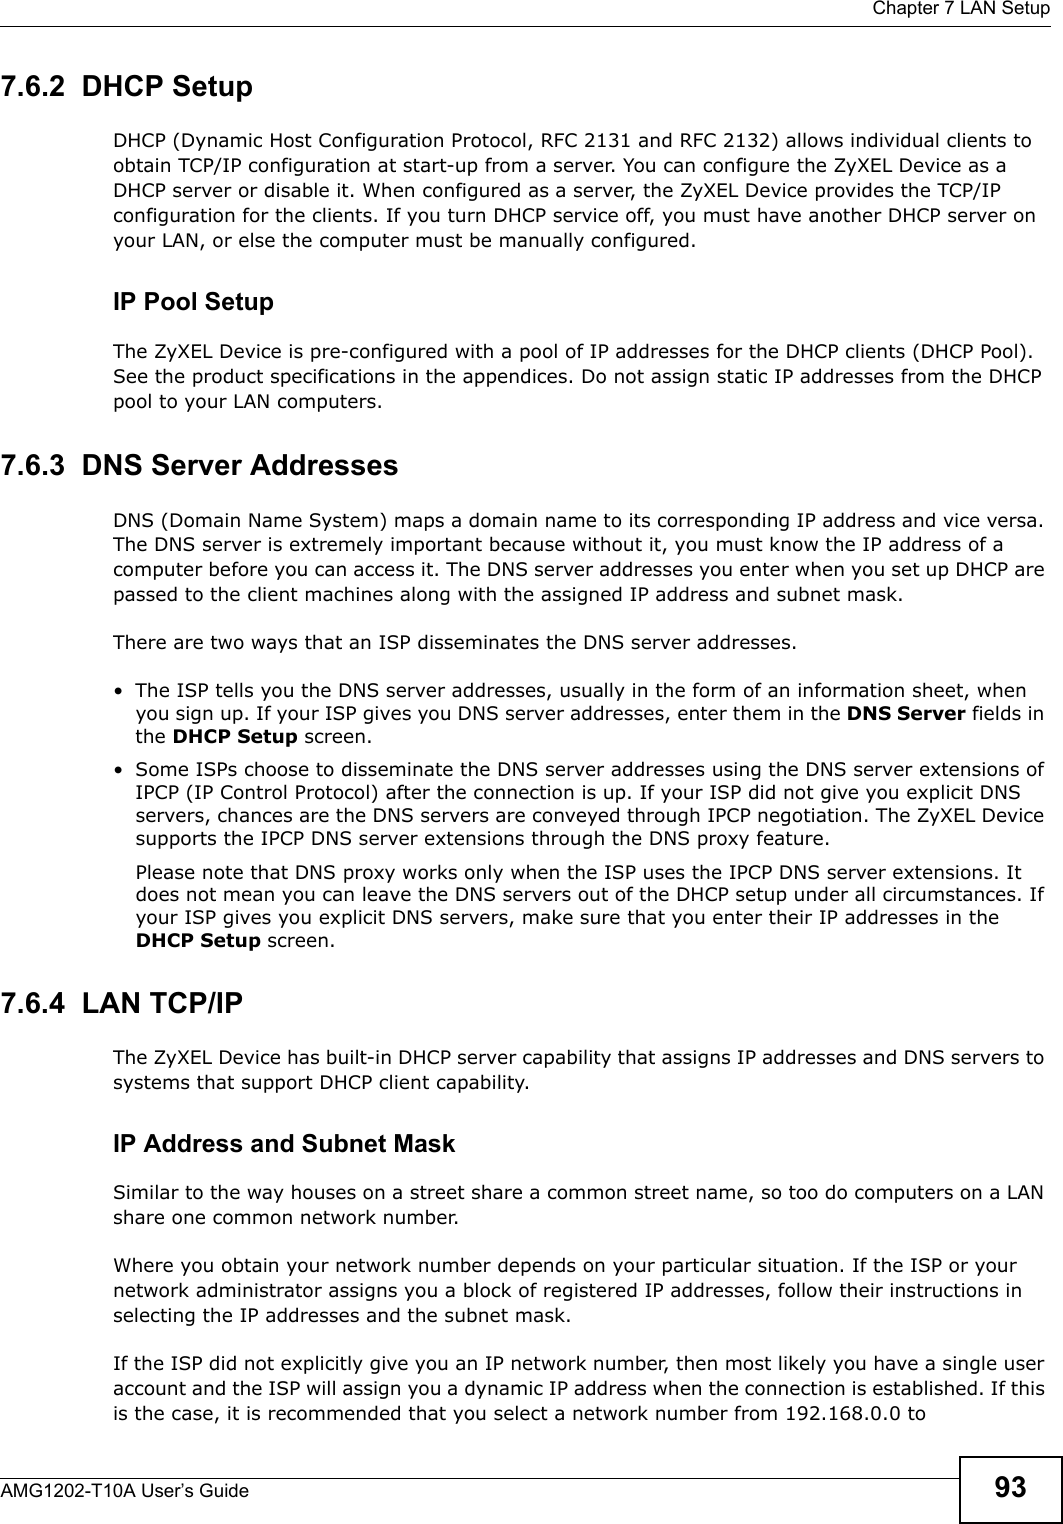  Chapter 7 LAN SetupAMG1202-T10A User’s Guide 937.6.2  DHCP SetupDHCP (Dynamic Host Configuration Protocol, RFC 2131 and RFC 2132) allows individual clients to obtain TCP/IP configuration at start-up from a server. You can configure the ZyXEL Device as a DHCP server or disable it. When configured as a server, the ZyXEL Device provides the TCP/IP configuration for the clients. If you turn DHCP service off, you must have another DHCP server on your LAN, or else the computer must be manually configured. IP Pool SetupThe ZyXEL Device is pre-configured with a pool of IP addresses for the DHCP clients (DHCP Pool). See the product specifications in the appendices. Do not assign static IP addresses from the DHCP pool to your LAN computers.7.6.3  DNS Server Addresses DNS (Domain Name System) maps a domain name to its corresponding IP address and vice versa. The DNS server is extremely important because without it, you must know the IP address of a computer before you can access it. The DNS server addresses you enter when you set up DHCP are passed to the client machines along with the assigned IP address and subnet mask.There are two ways that an ISP disseminates the DNS server addresses. • The ISP tells you the DNS server addresses, usually in the form of an information sheet, when you sign up. If your ISP gives you DNS server addresses, enter them in the DNS Server fields in the DHCP Setup screen.• Some ISPs choose to disseminate the DNS server addresses using the DNS server extensions of IPCP (IP Control Protocol) after the connection is up. If your ISP did not give you explicit DNS servers, chances are the DNS servers are conveyed through IPCP negotiation. The ZyXEL Device supports the IPCP DNS server extensions through the DNS proxy feature.Please note that DNS proxy works only when the ISP uses the IPCP DNS server extensions. It does not mean you can leave the DNS servers out of the DHCP setup under all circumstances. If your ISP gives you explicit DNS servers, make sure that you enter their IP addresses in the DHCP Setup screen.7.6.4  LAN TCP/IP The ZyXEL Device has built-in DHCP server capability that assigns IP addresses and DNS servers to systems that support DHCP client capability.IP Address and Subnet MaskSimilar to the way houses on a street share a common street name, so too do computers on a LAN share one common network number.Where you obtain your network number depends on your particular situation. If the ISP or your network administrator assigns you a block of registered IP addresses, follow their instructions in selecting the IP addresses and the subnet mask.If the ISP did not explicitly give you an IP network number, then most likely you have a single user account and the ISP will assign you a dynamic IP address when the connection is established. If this is the case, it is recommended that you select a network number from 192.168.0.0 to 